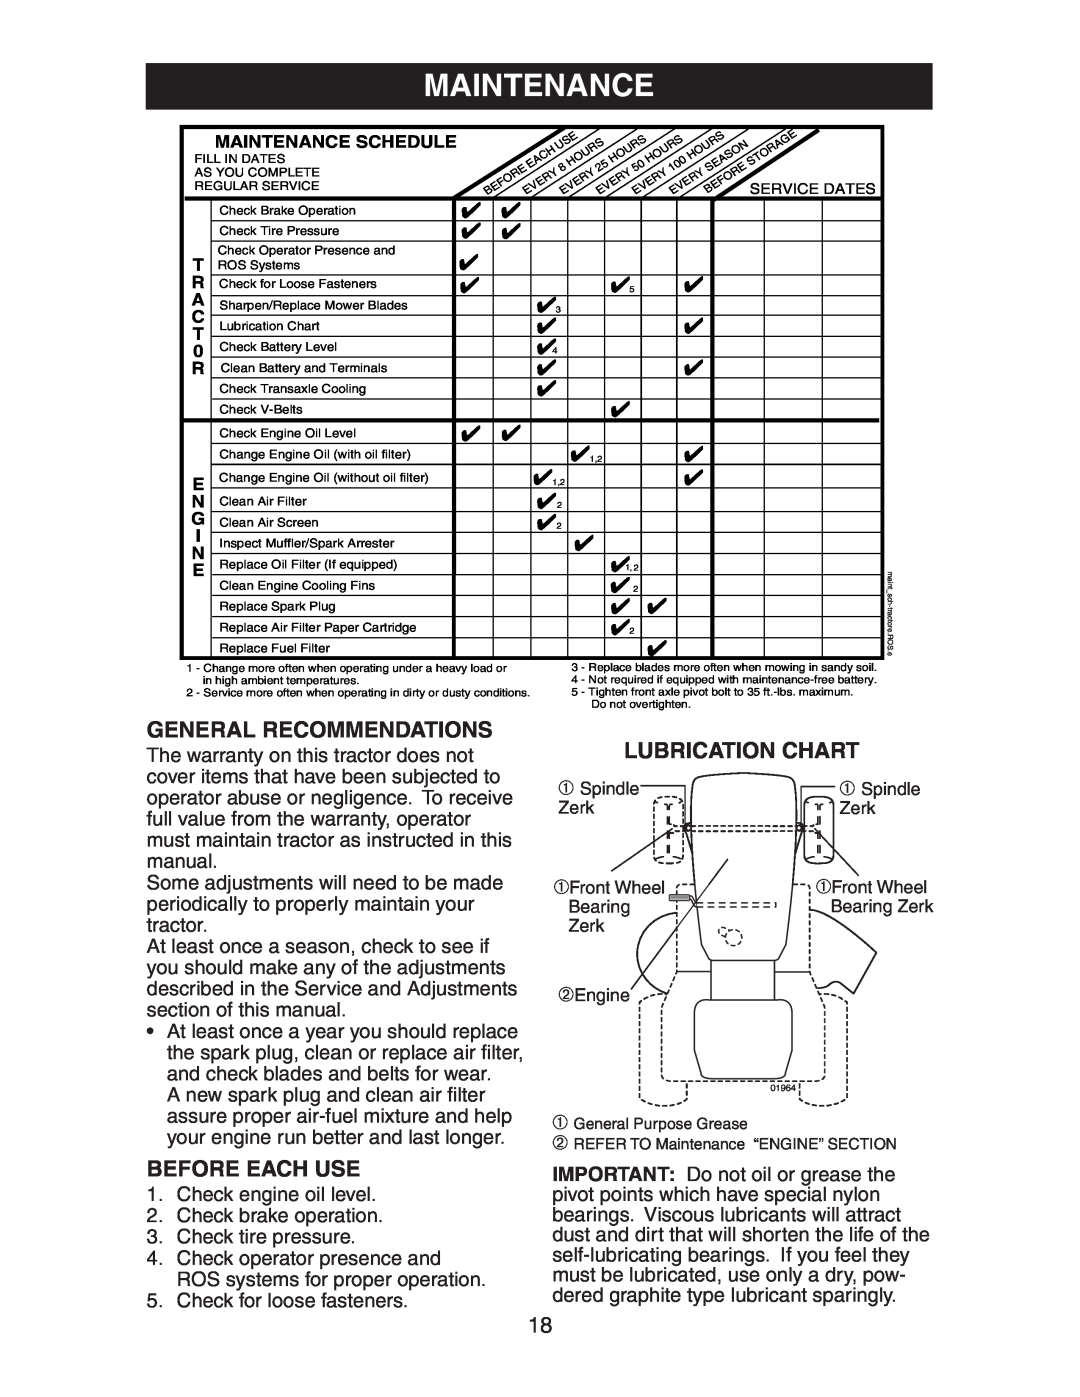 Craftsman 917.27582 owner manual Maintenance, General Recommendations, Lubrication Chart, Before Each Use 